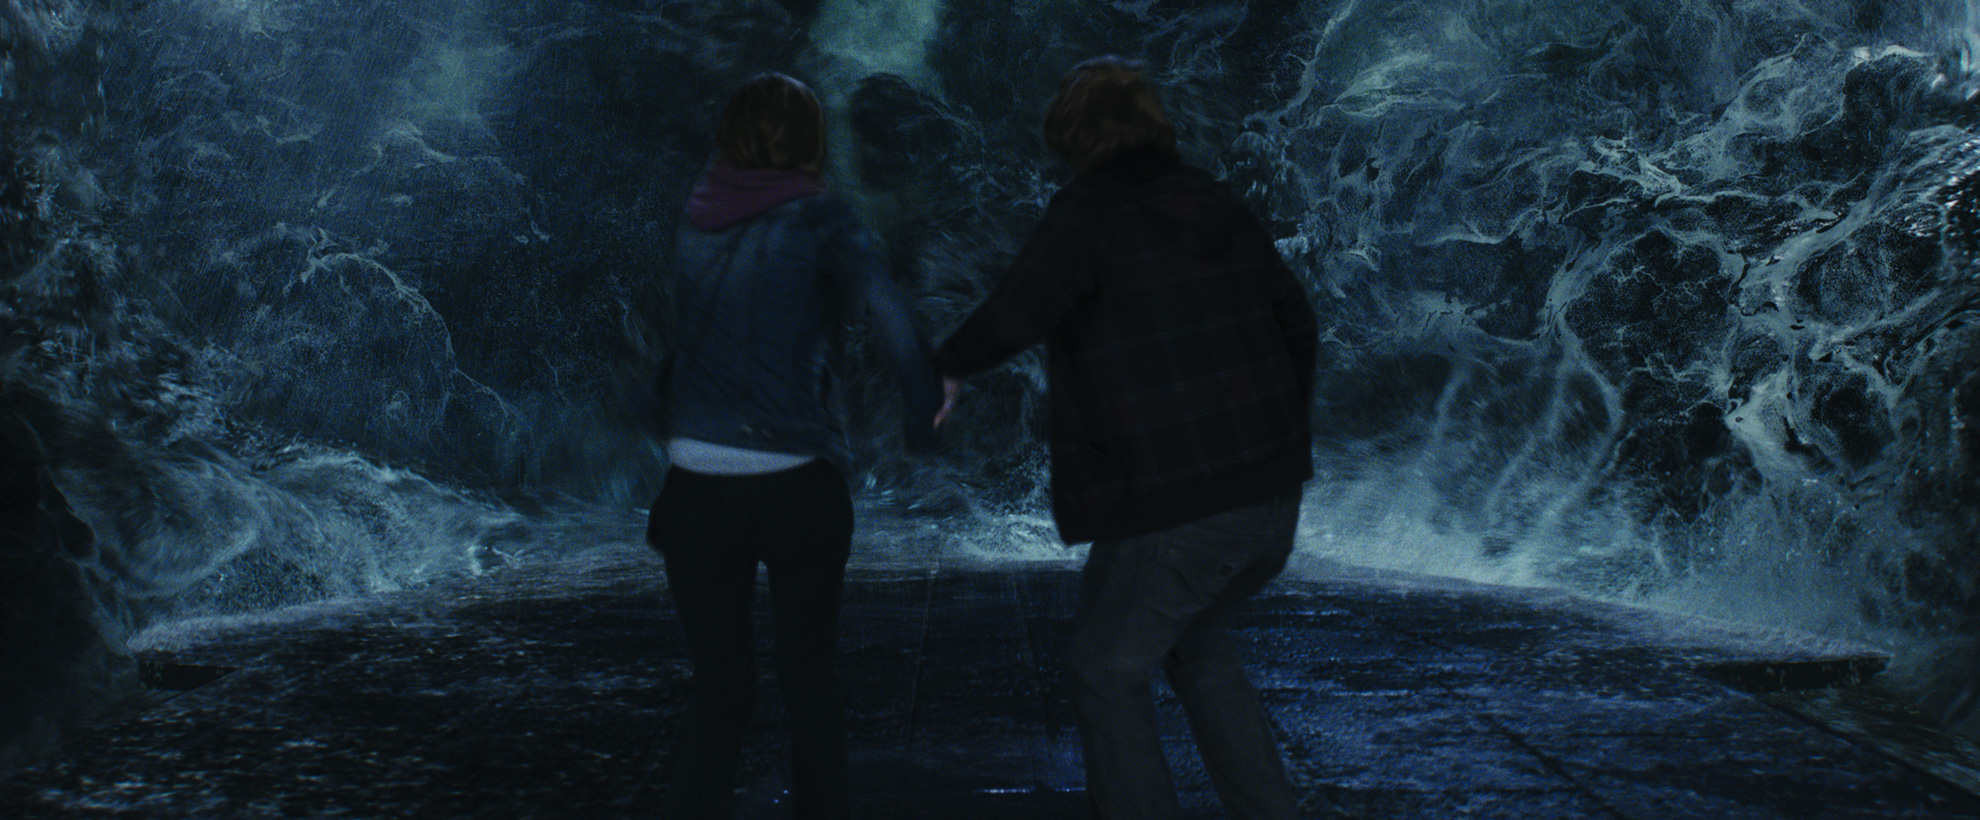 Ron and Hermione back away from a giant wave